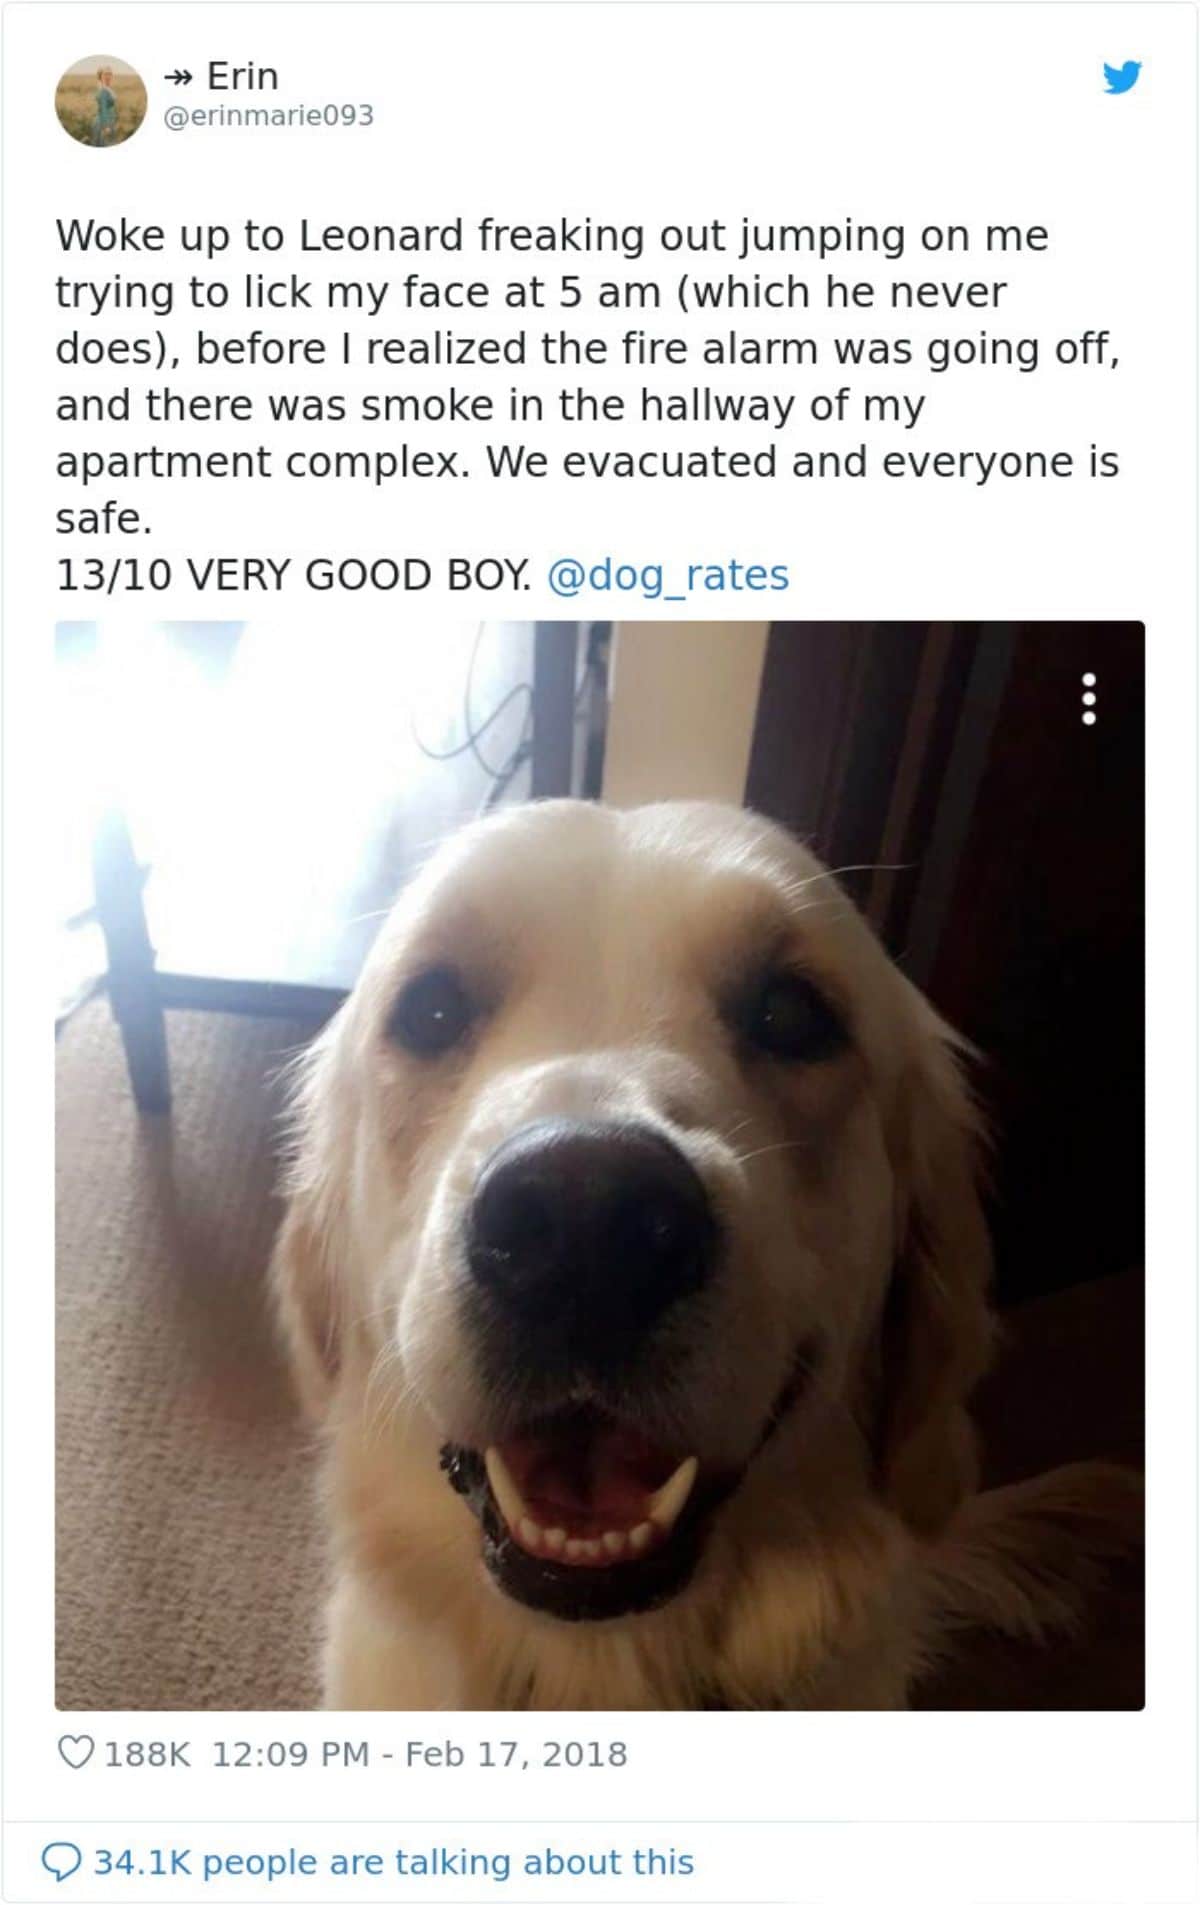 tweet saying the golden retriever in the photo woke them up early morning and saved them from a fire